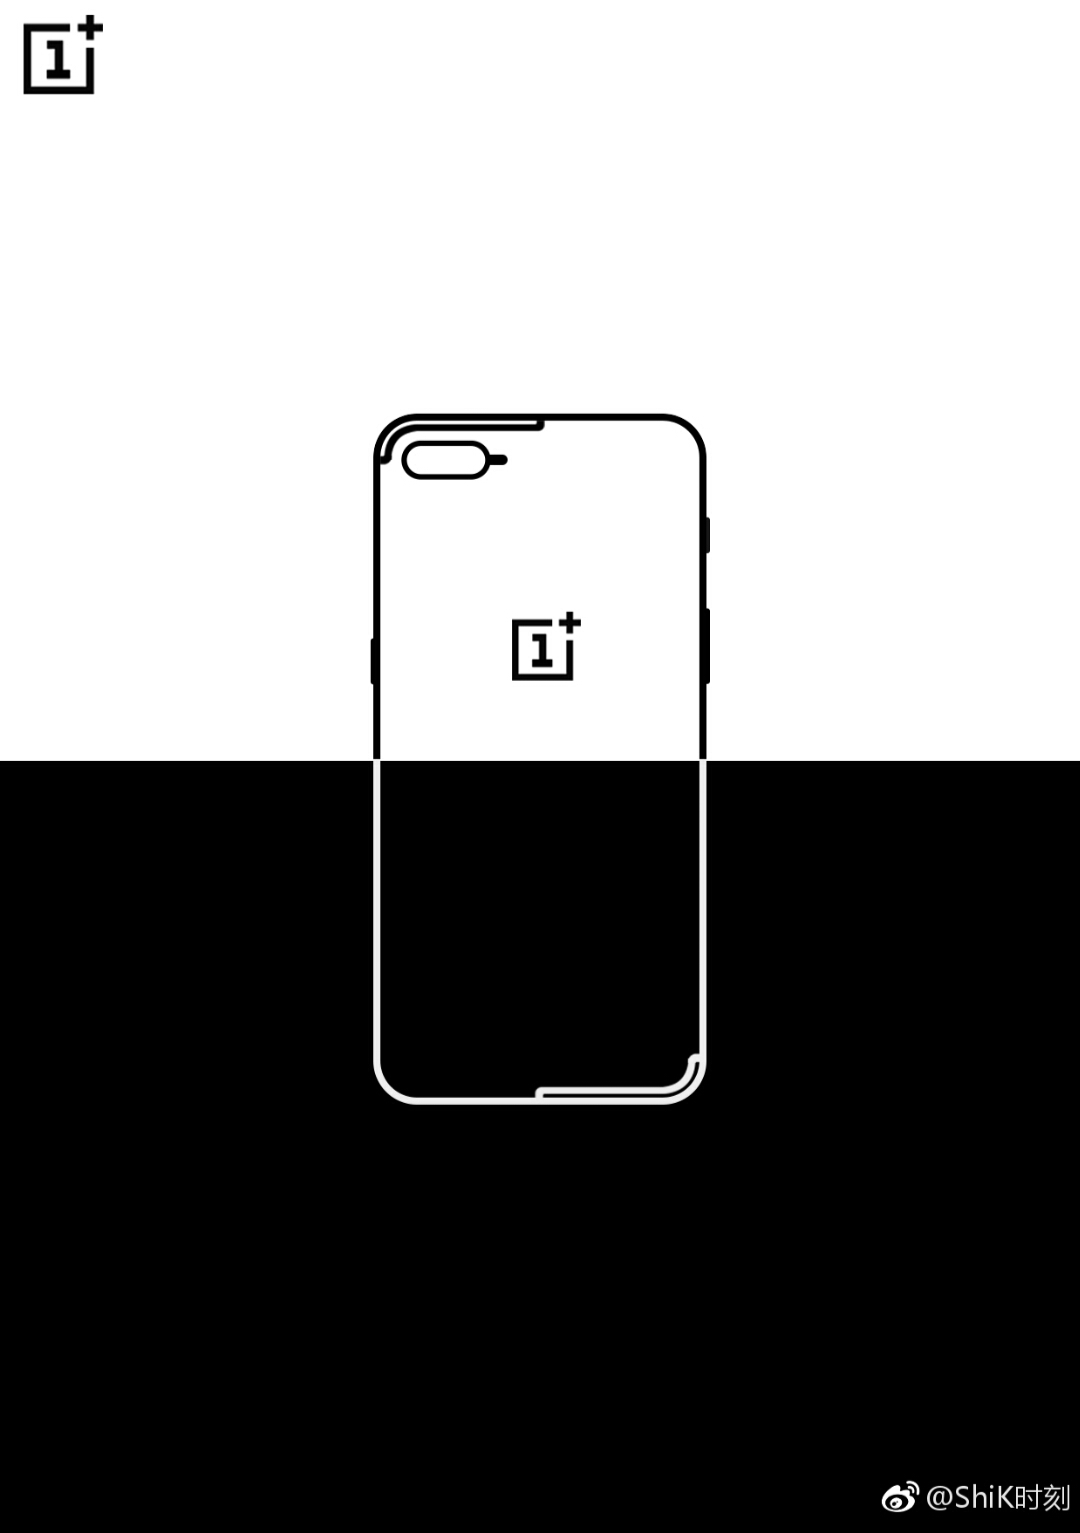 Leak: OnePlus 5 design is not like what you thought 2